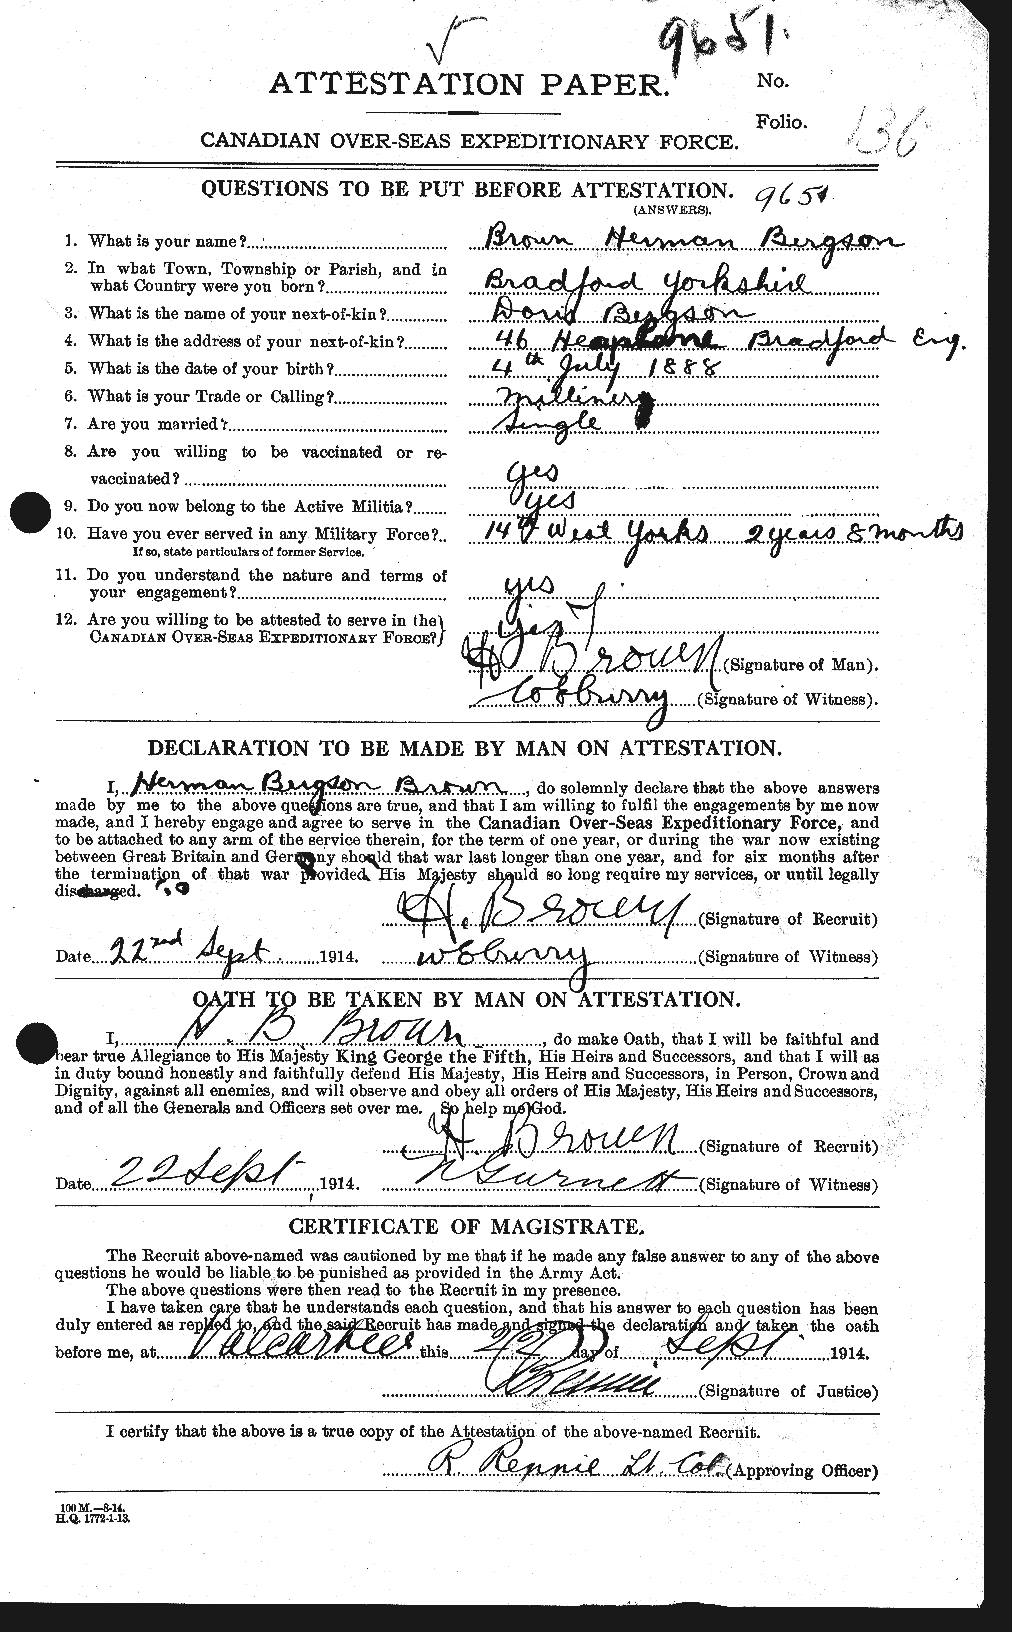 Personnel Records of the First World War - CEF 265596a